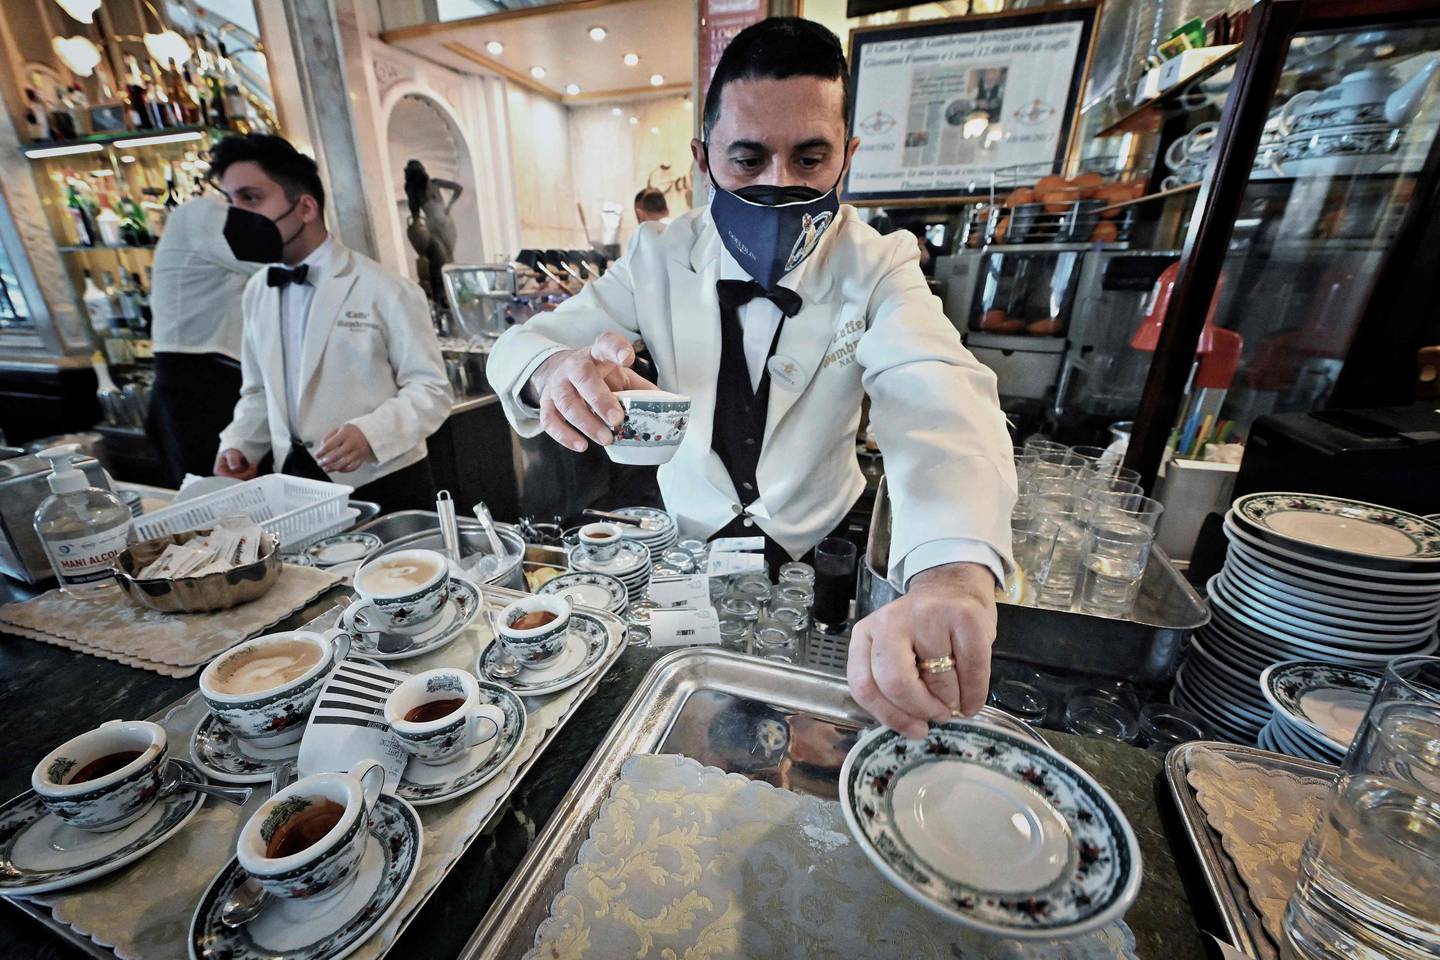 Espressos being served at the Gran Caffe Gambrinus in Naples, Italy in February. AFP